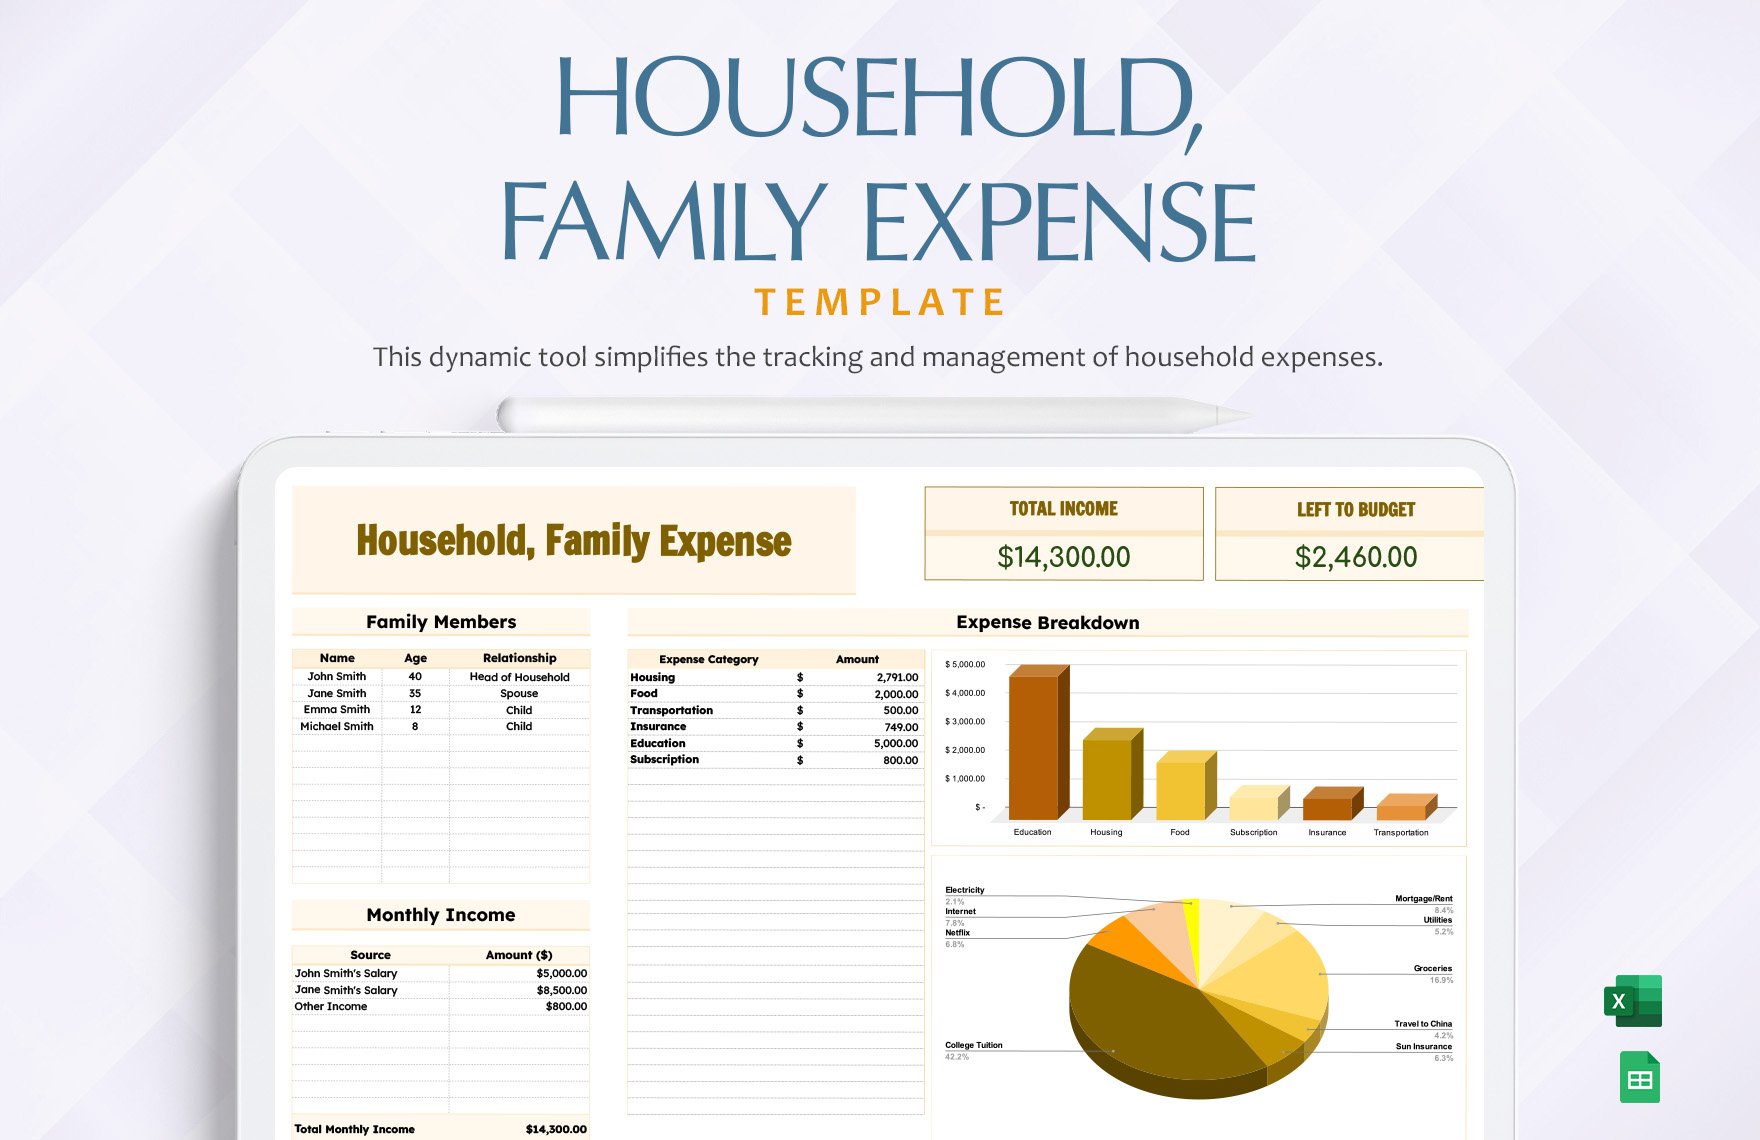 Free Household, Family Expense Template in Excel, Google Sheets